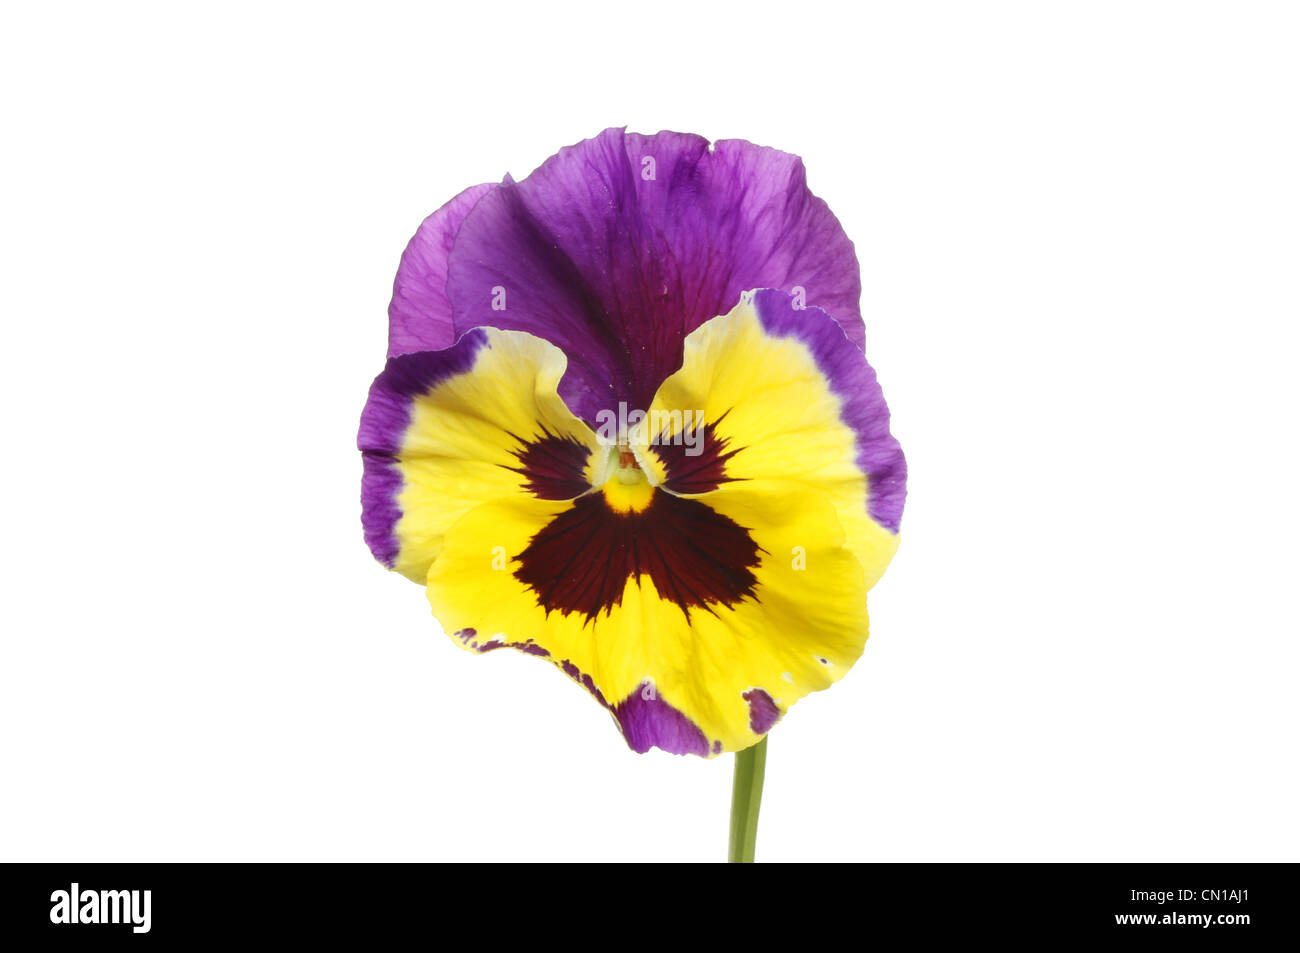 Violet et jaune pansy flower isolated on white Banque D'Images